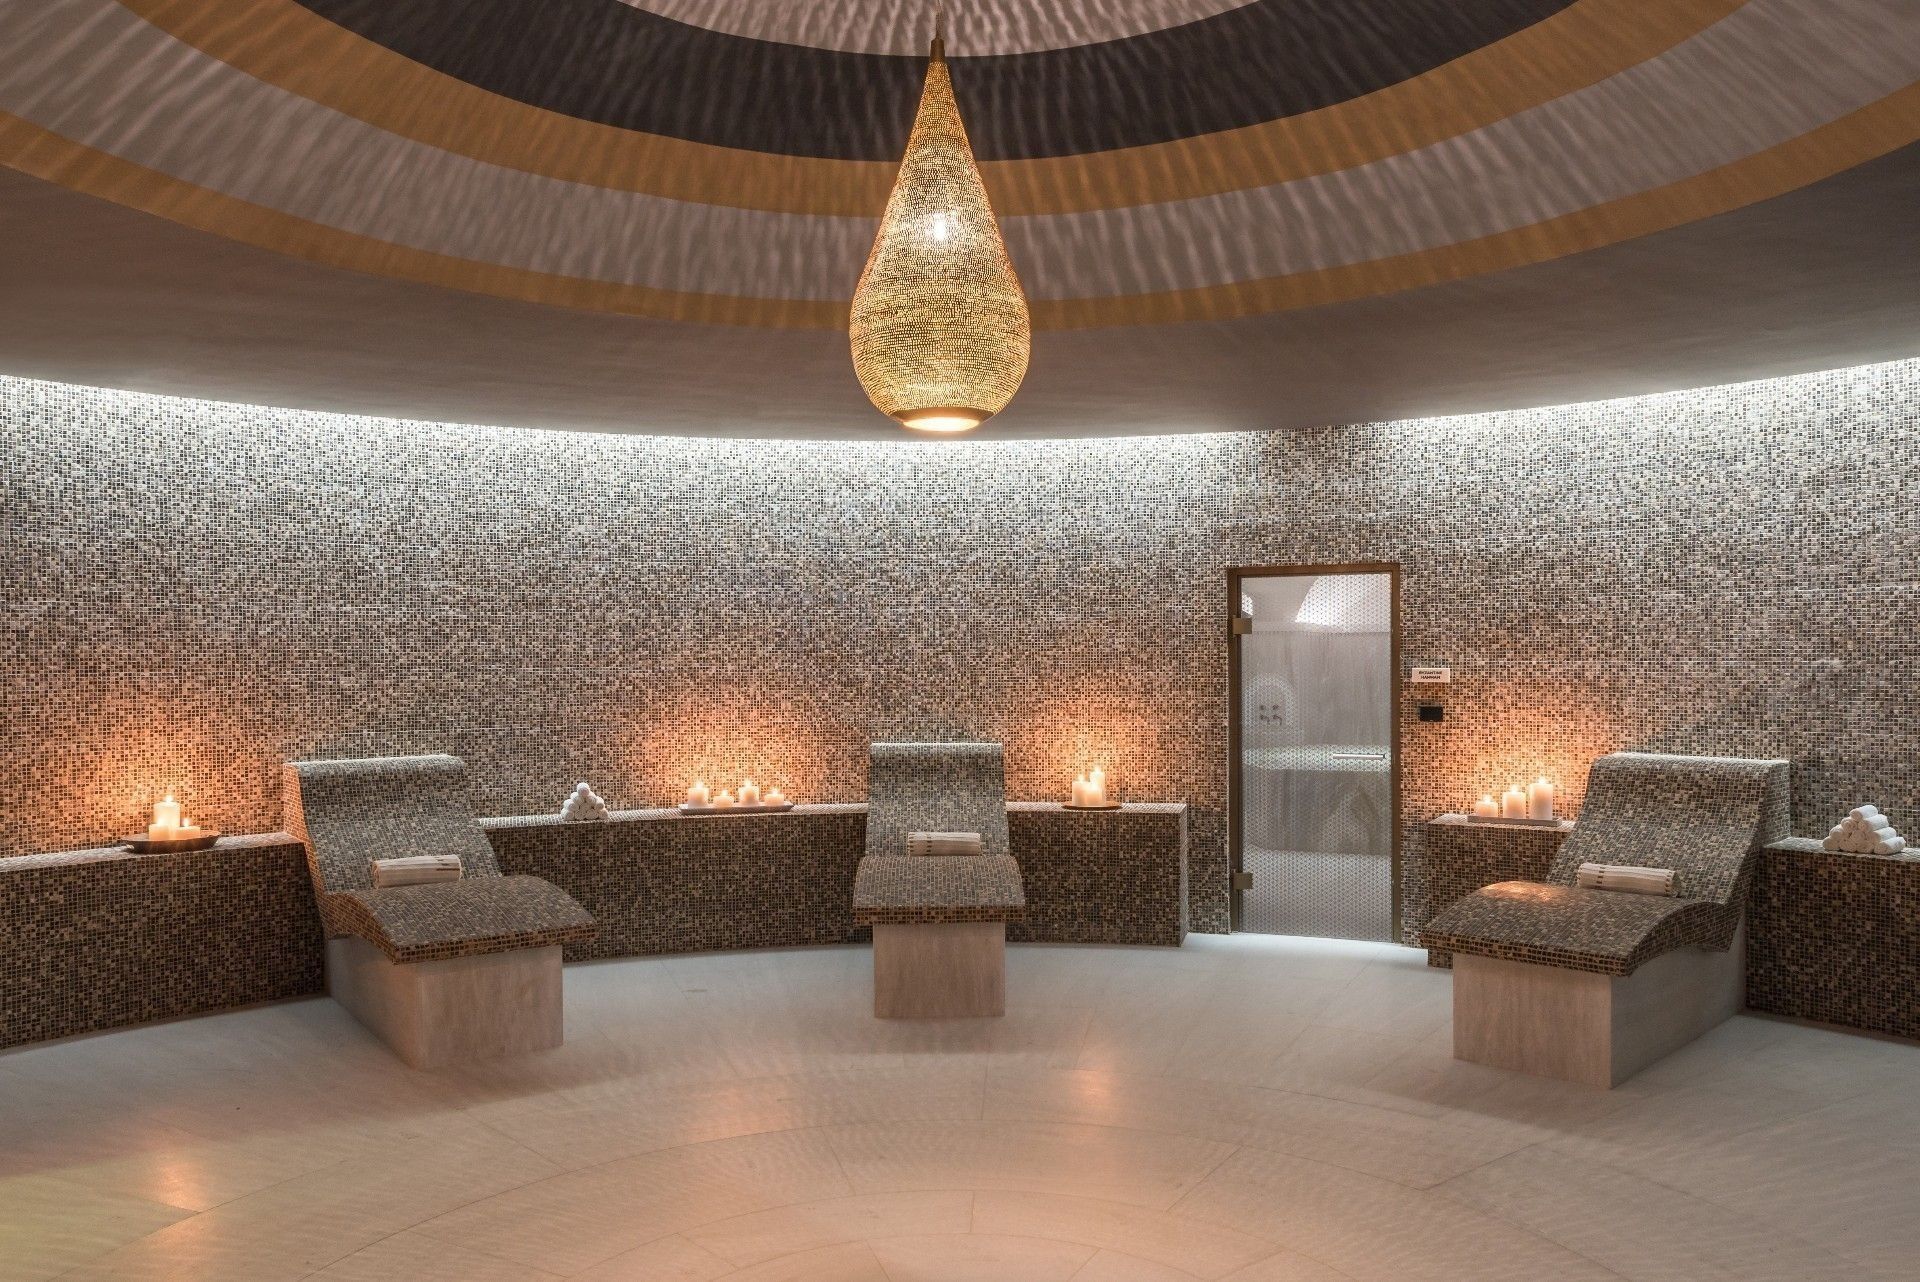 Euphoria in Mystras, designed by Deca Architecture and Natalia Efraimoglou, has one of the world's most creative and beautifully designed spas in the world - Effect Magazine